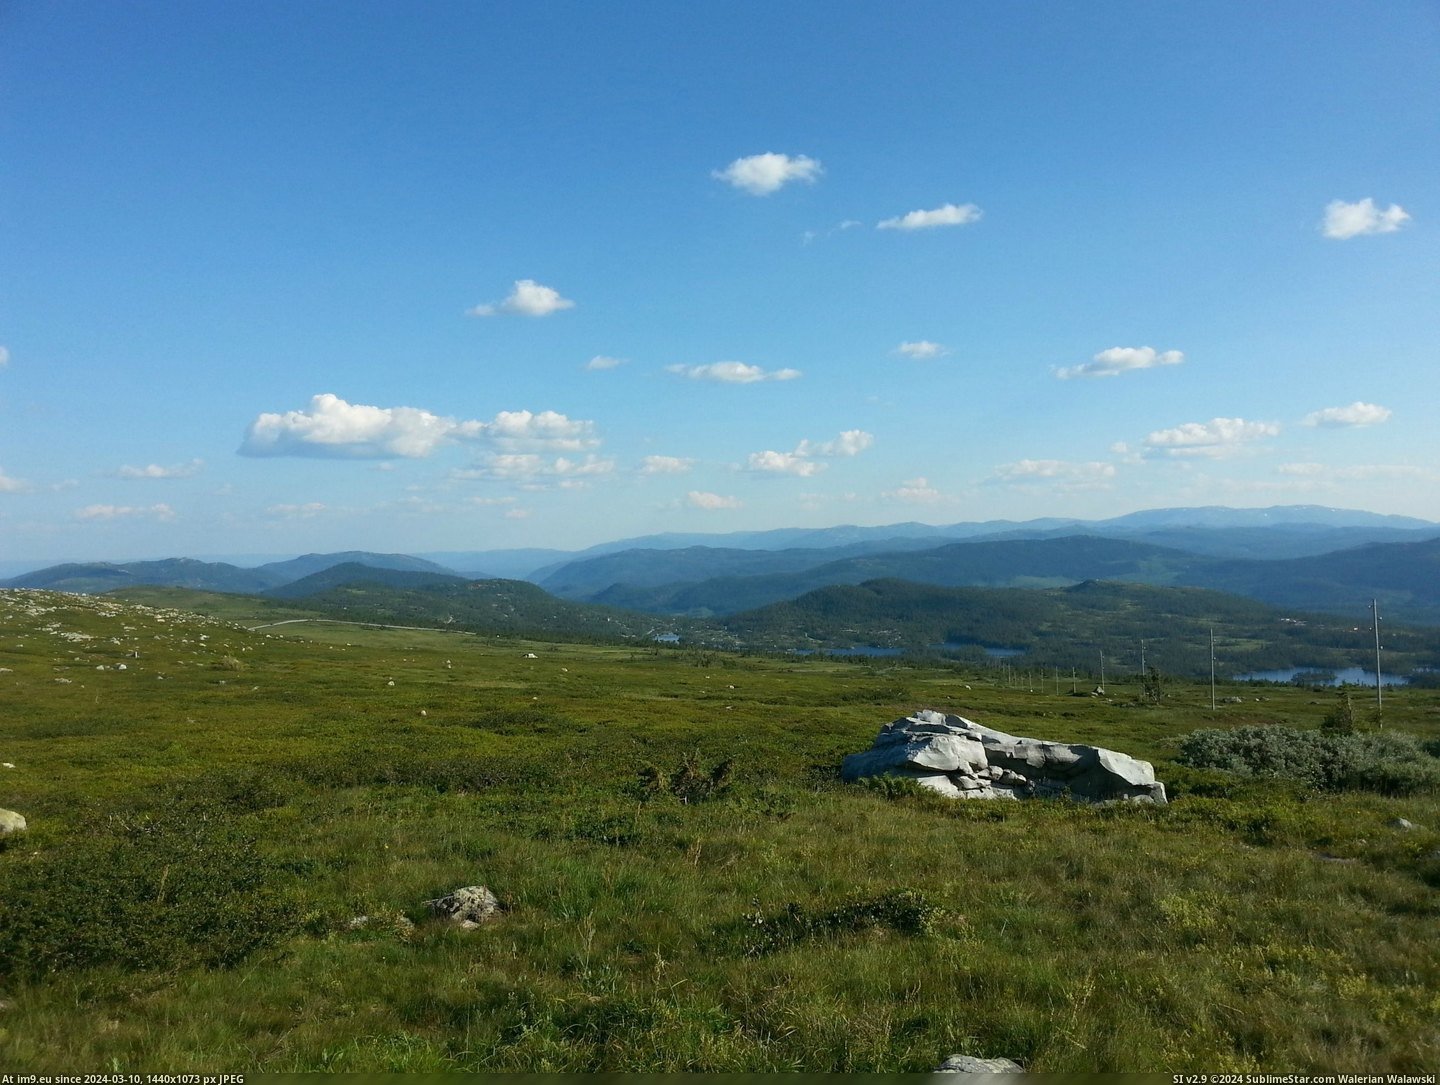 #Day #Way #Norway #2448x1836 #Gaustatoppen #Clear #Base #Sweden [Earthporn] They say you can see all the way to Sweden on a clear day -- from the base of Gaustatoppen, Norway [2448x1836] Pic. (Изображение из альбом My r/EARTHPORN favs))